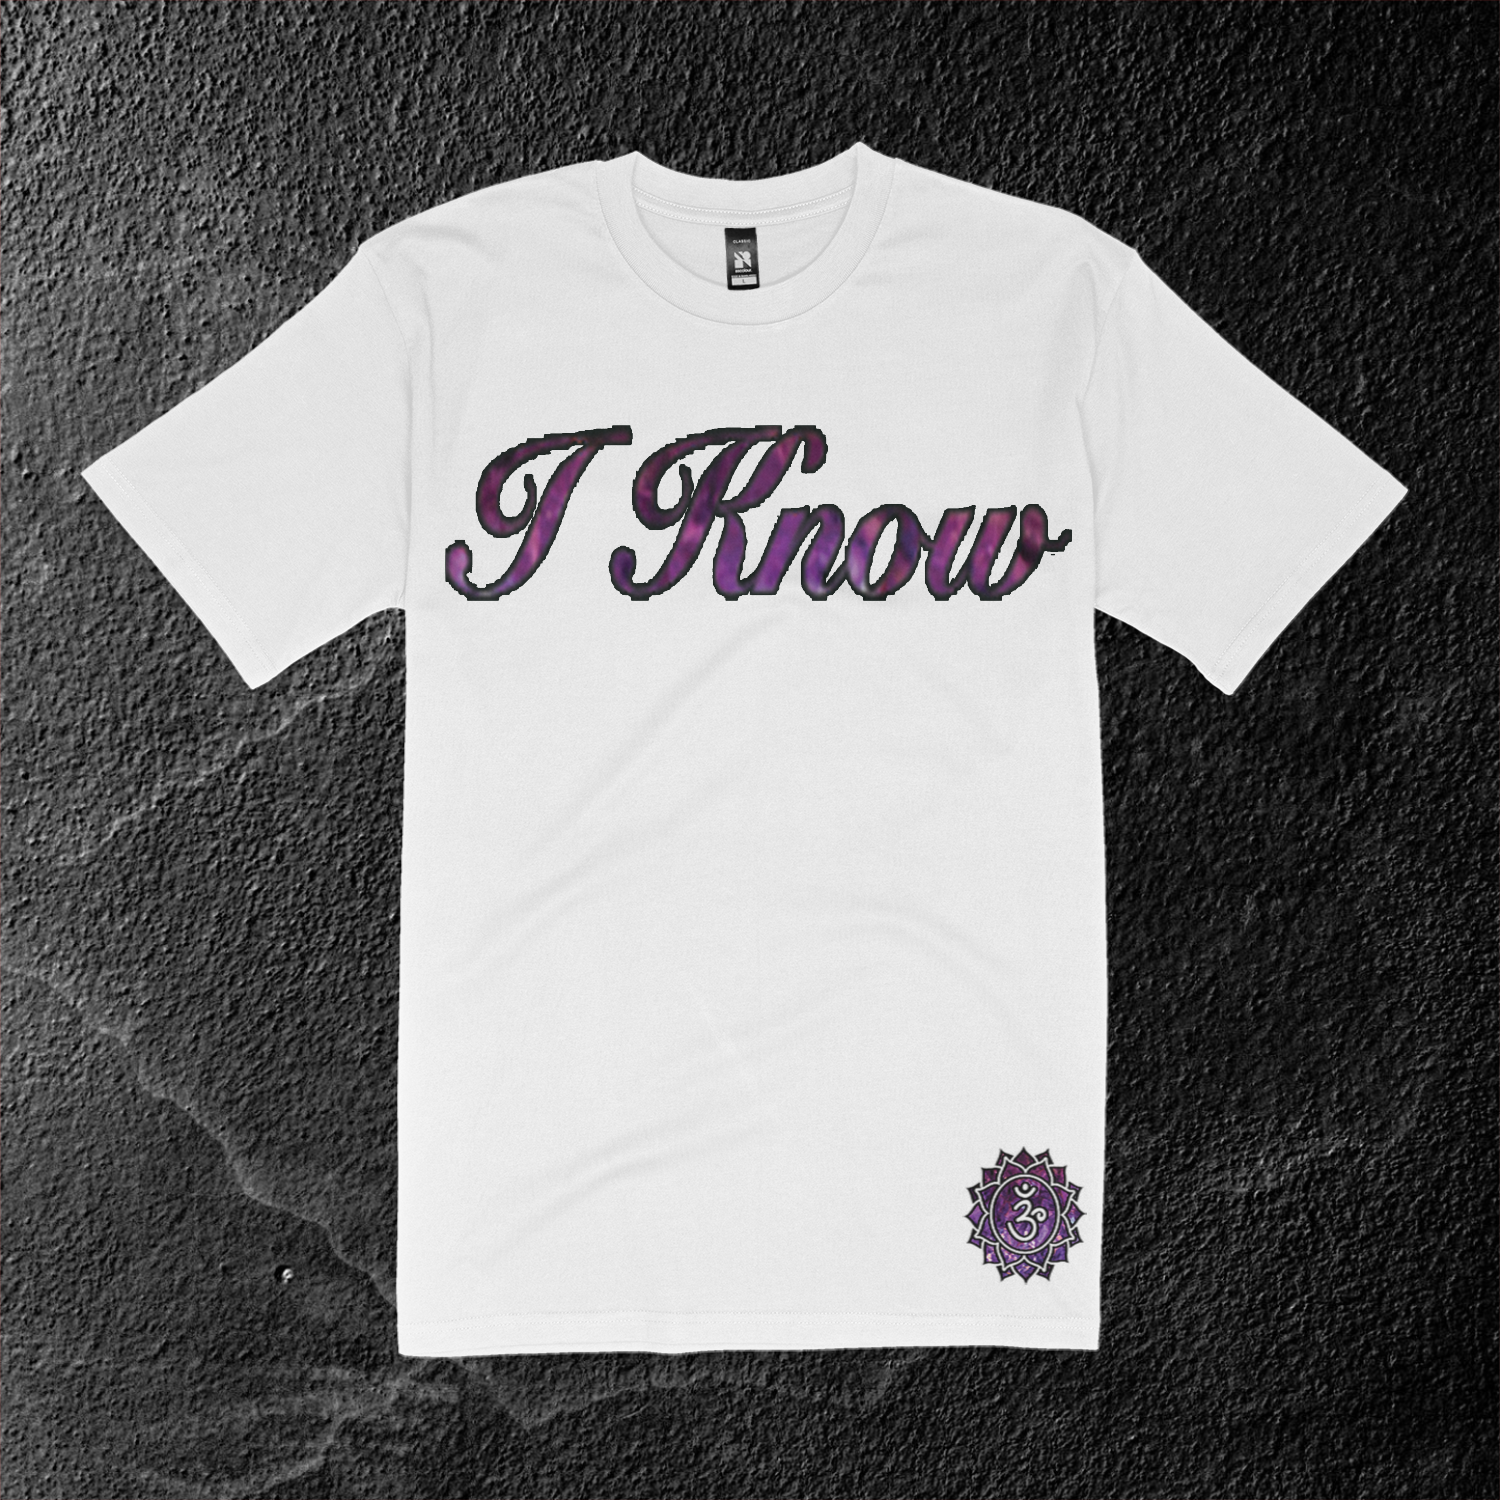 White t-shirt with the text "I know." printed on it in Amethyst Stone and outlined in black, in a cursive font. The text is centered on the shirt and is large and easy to read.